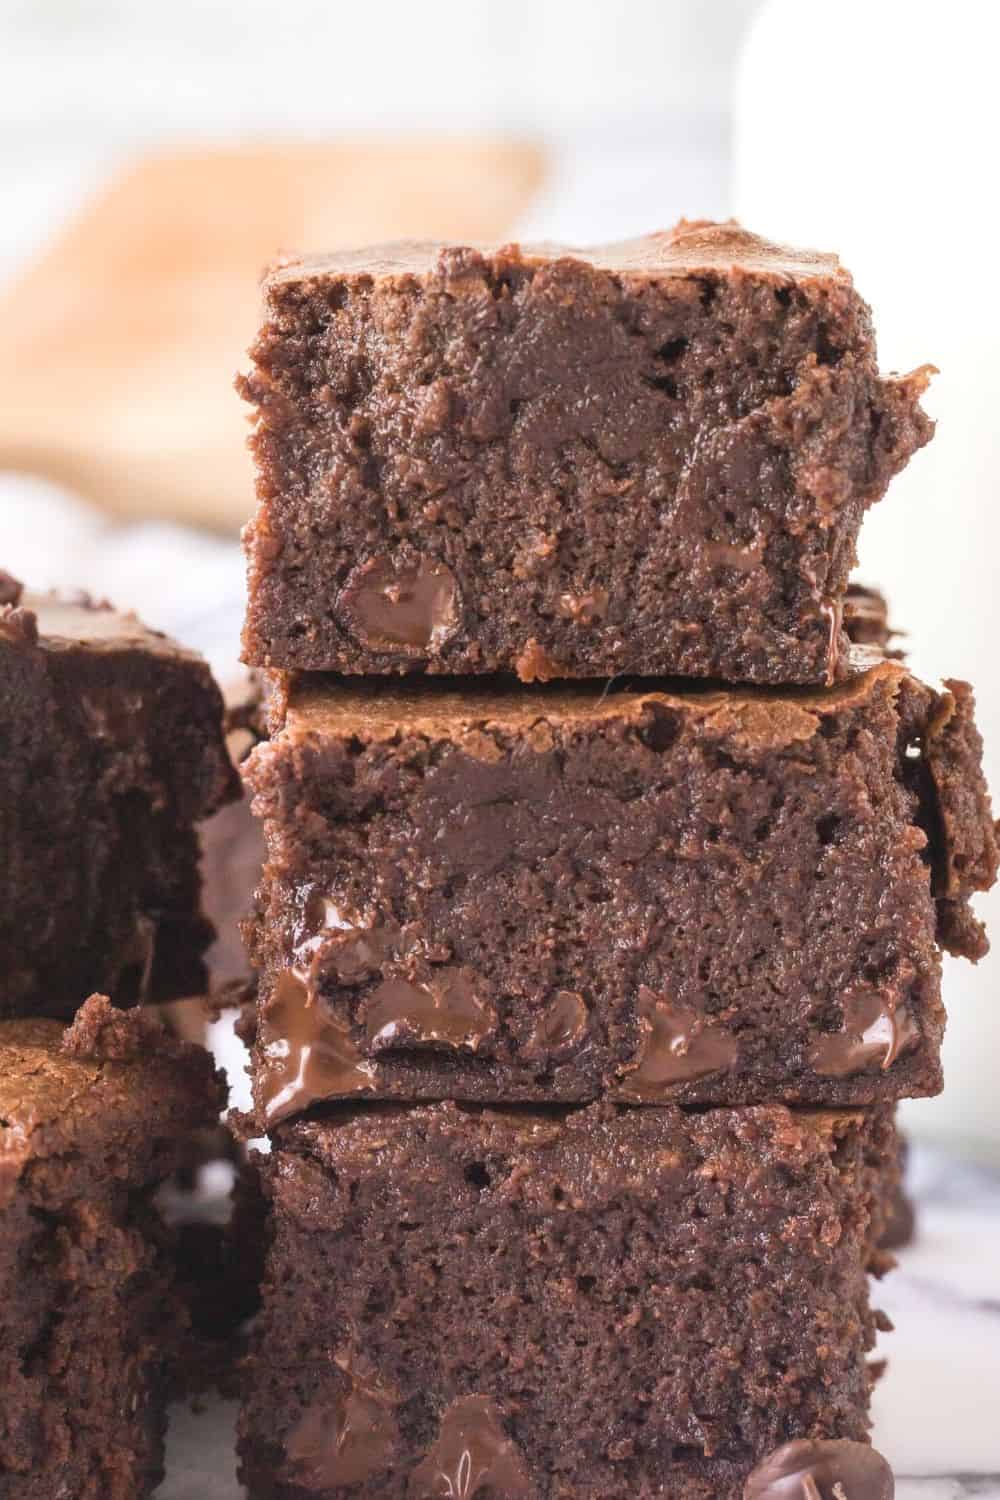 side view of three sweetened condensed milk brownies stacked on top of each other, showing the moist and fudgy texture.